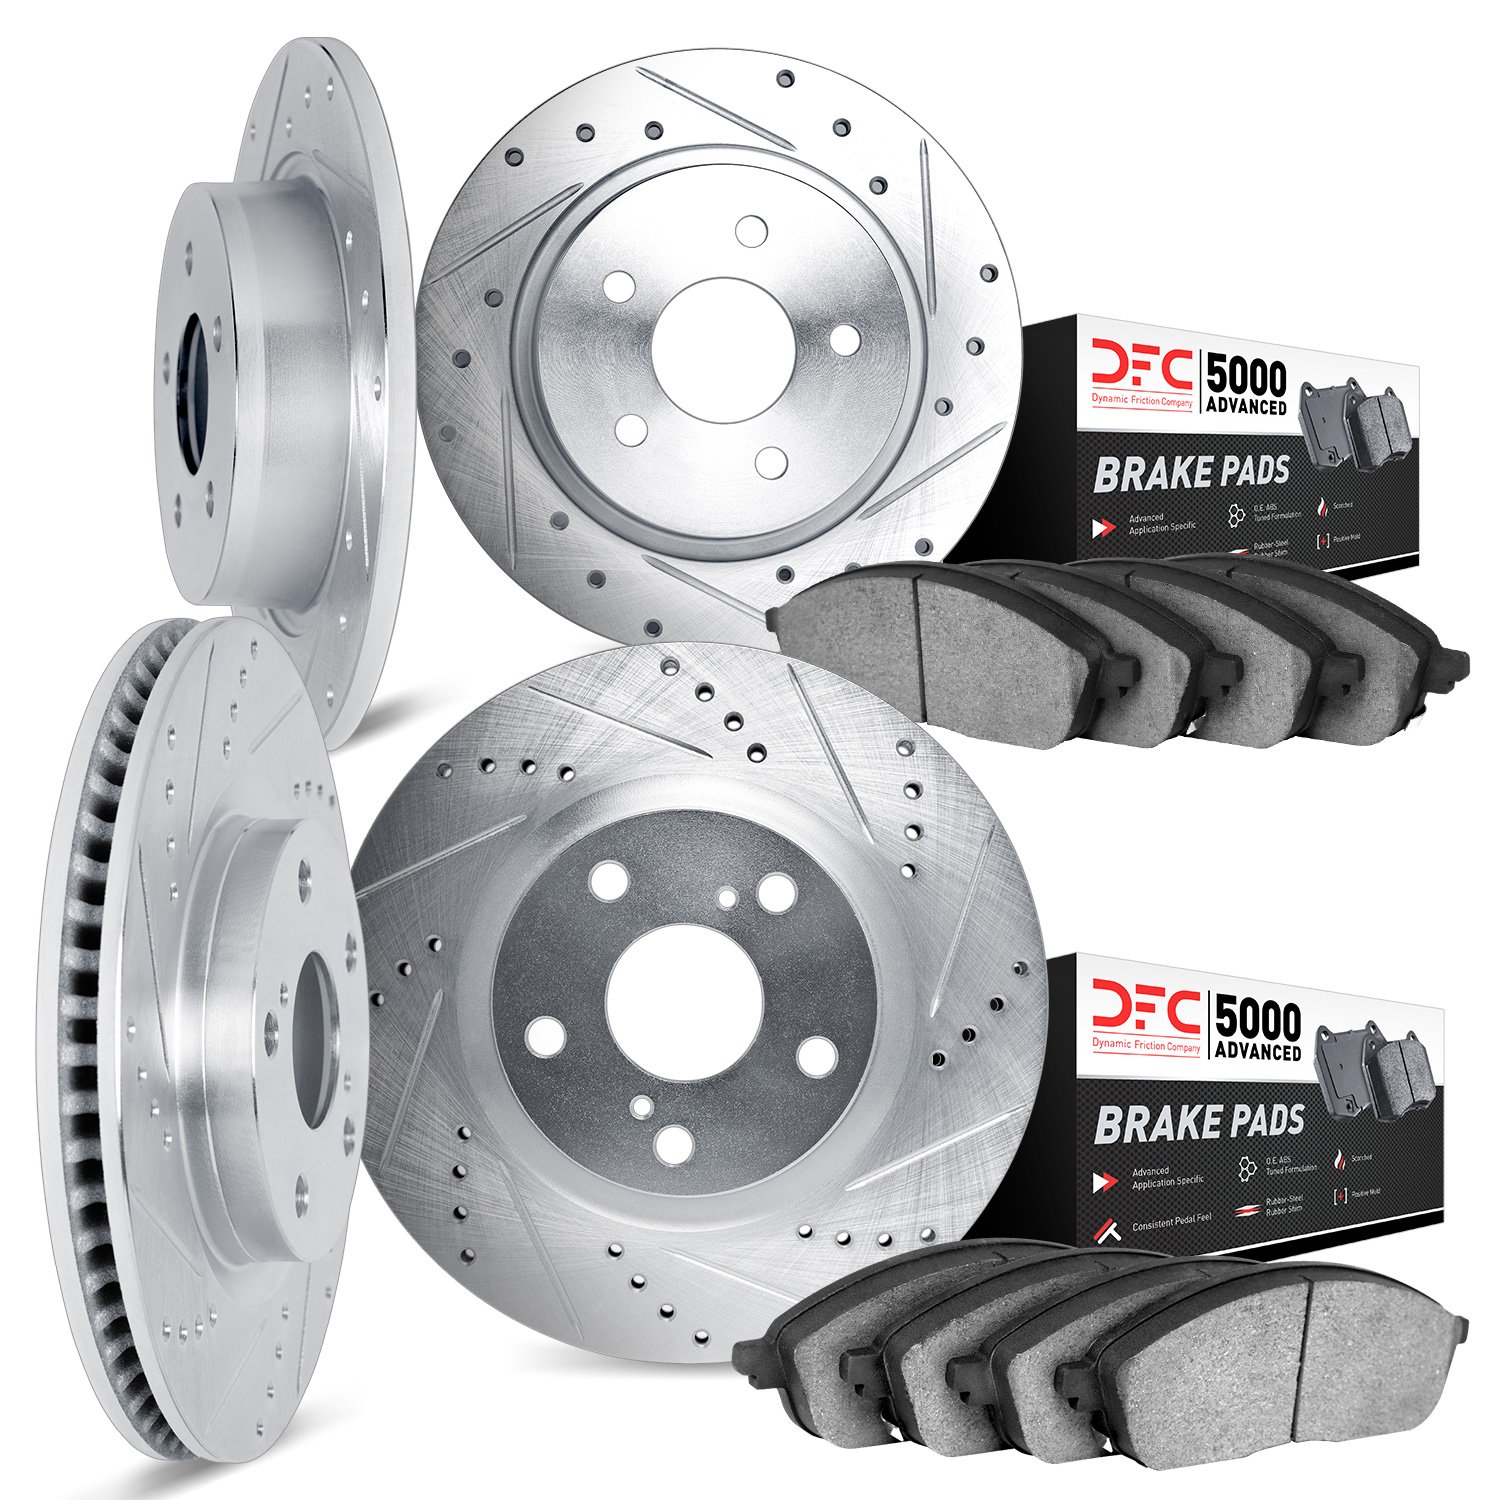 7504-59082 Drilled/Slotted Brake Rotors w/5000 Advanced Brake Pads Kit [Silver], 2007-2015 Acura/Honda, Position: Front and Rear